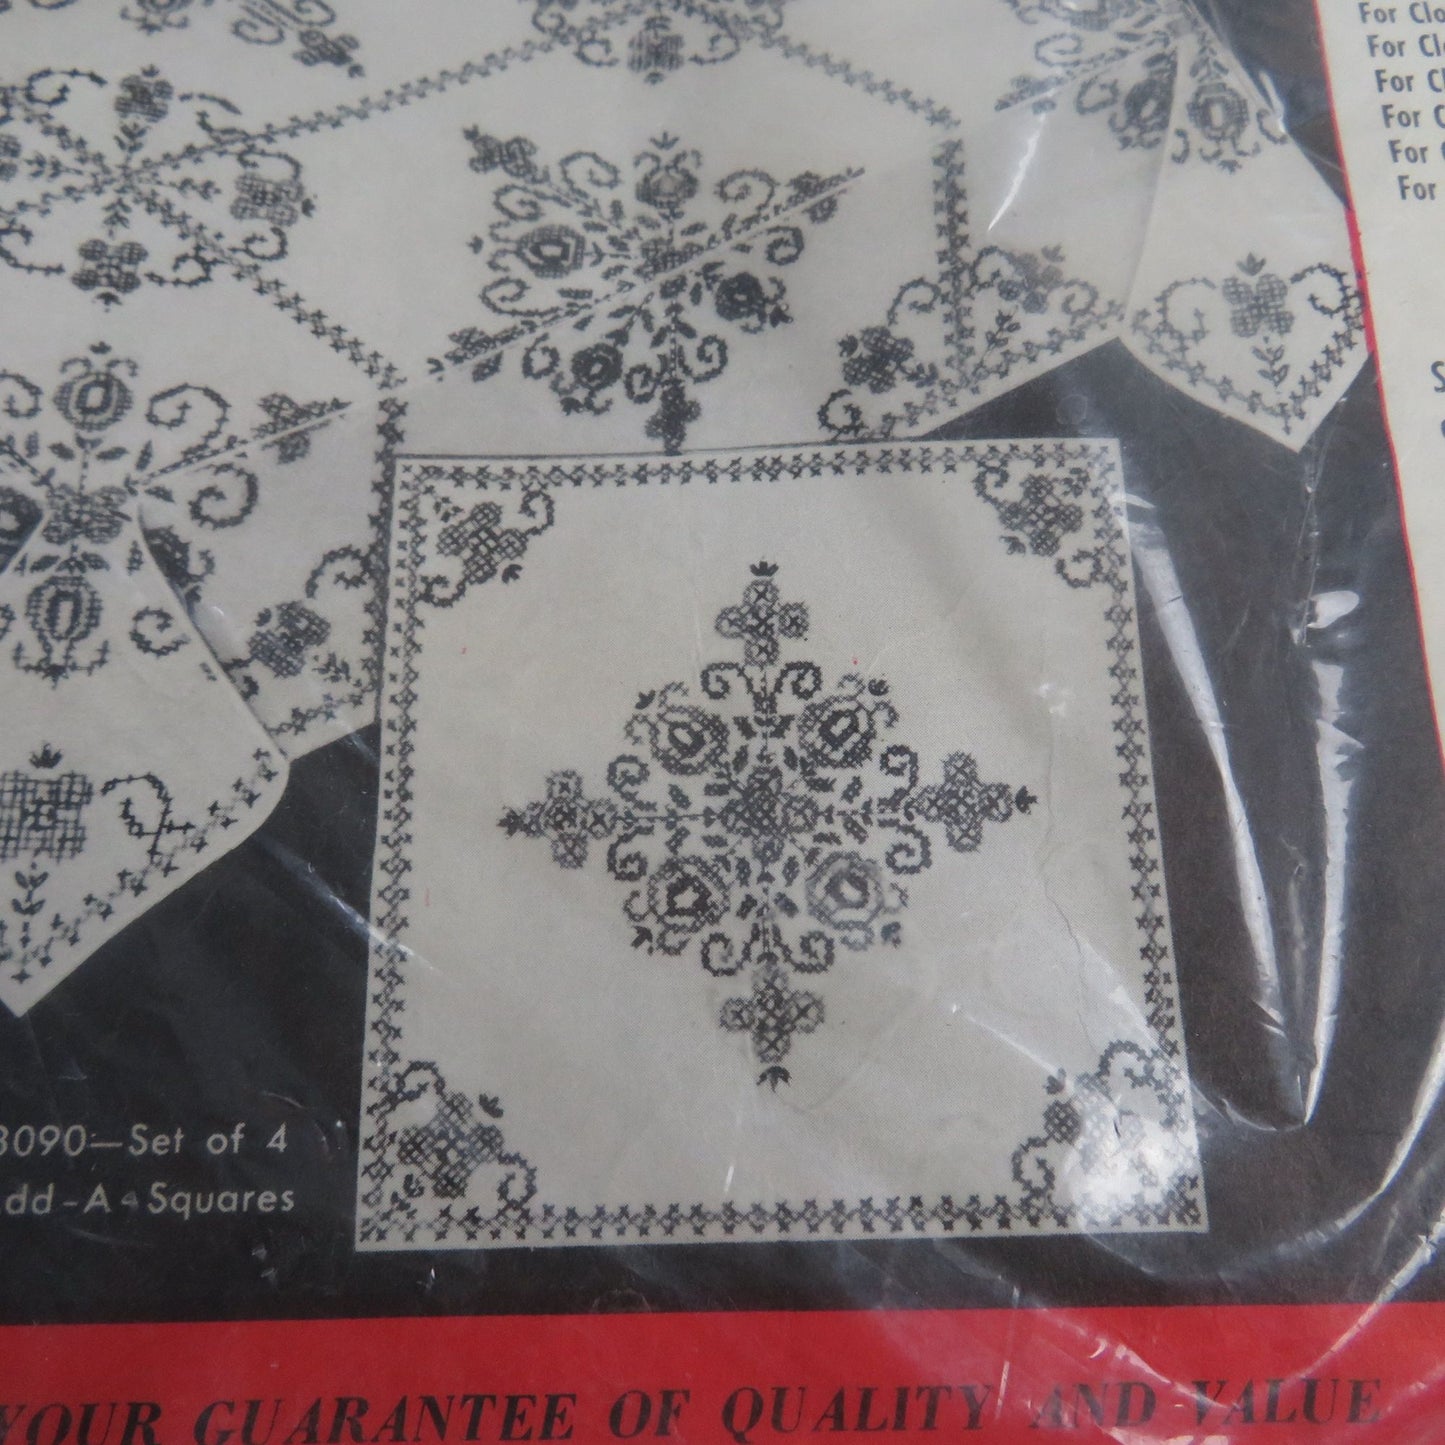 Vintage Oyster Linen Tablecloth Add A Square Embroidery Kit by Bucilla Stitchery McCall's Needle Work C6K11